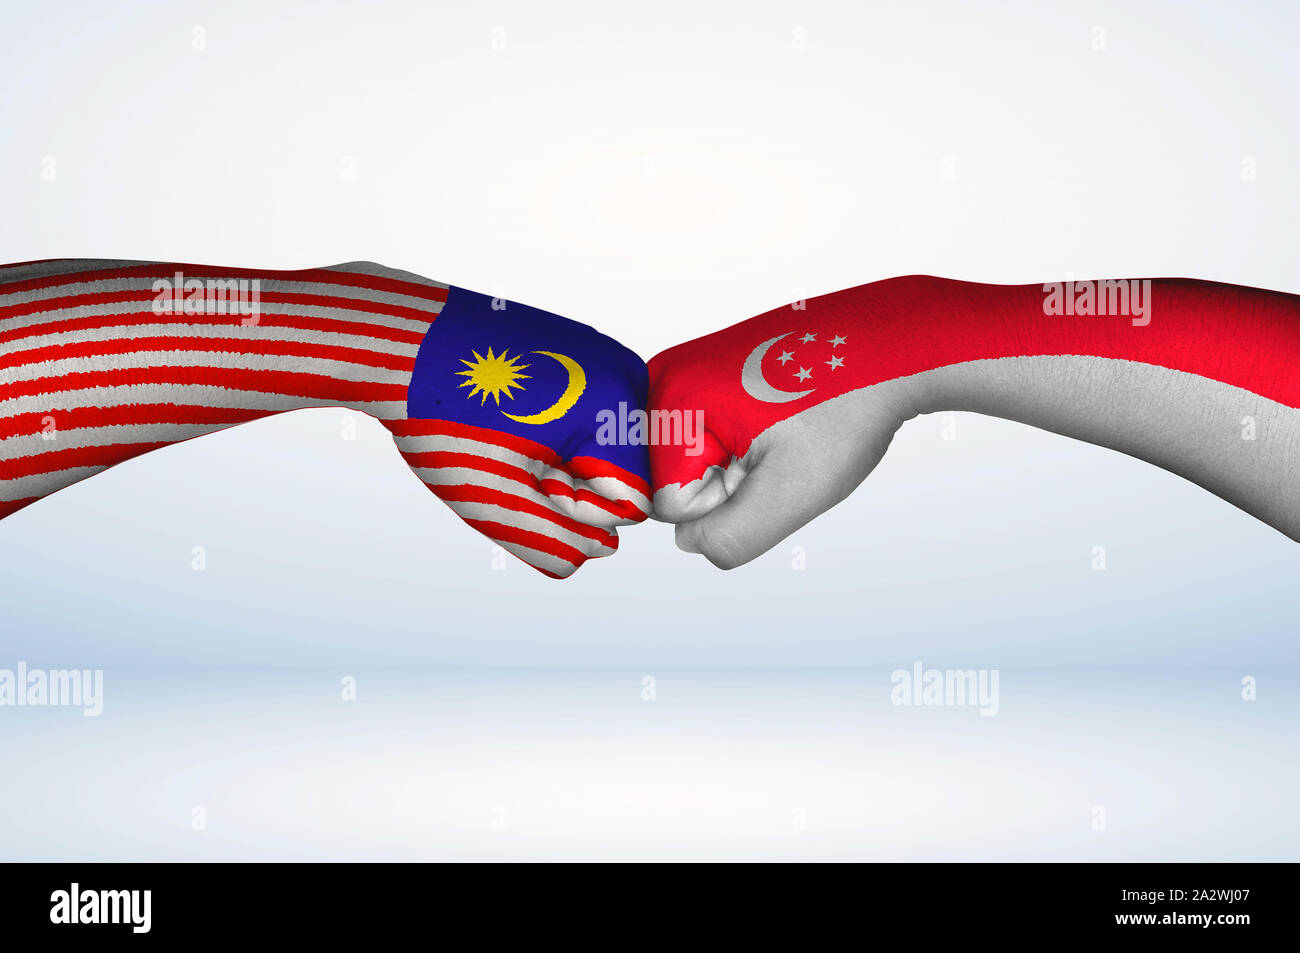 Fist bump of Malaysian and Singaporean flags. Two hands with painted flags of Malaysia and Singapore Flag fist bumping as a symbol of unity. Stock Photo